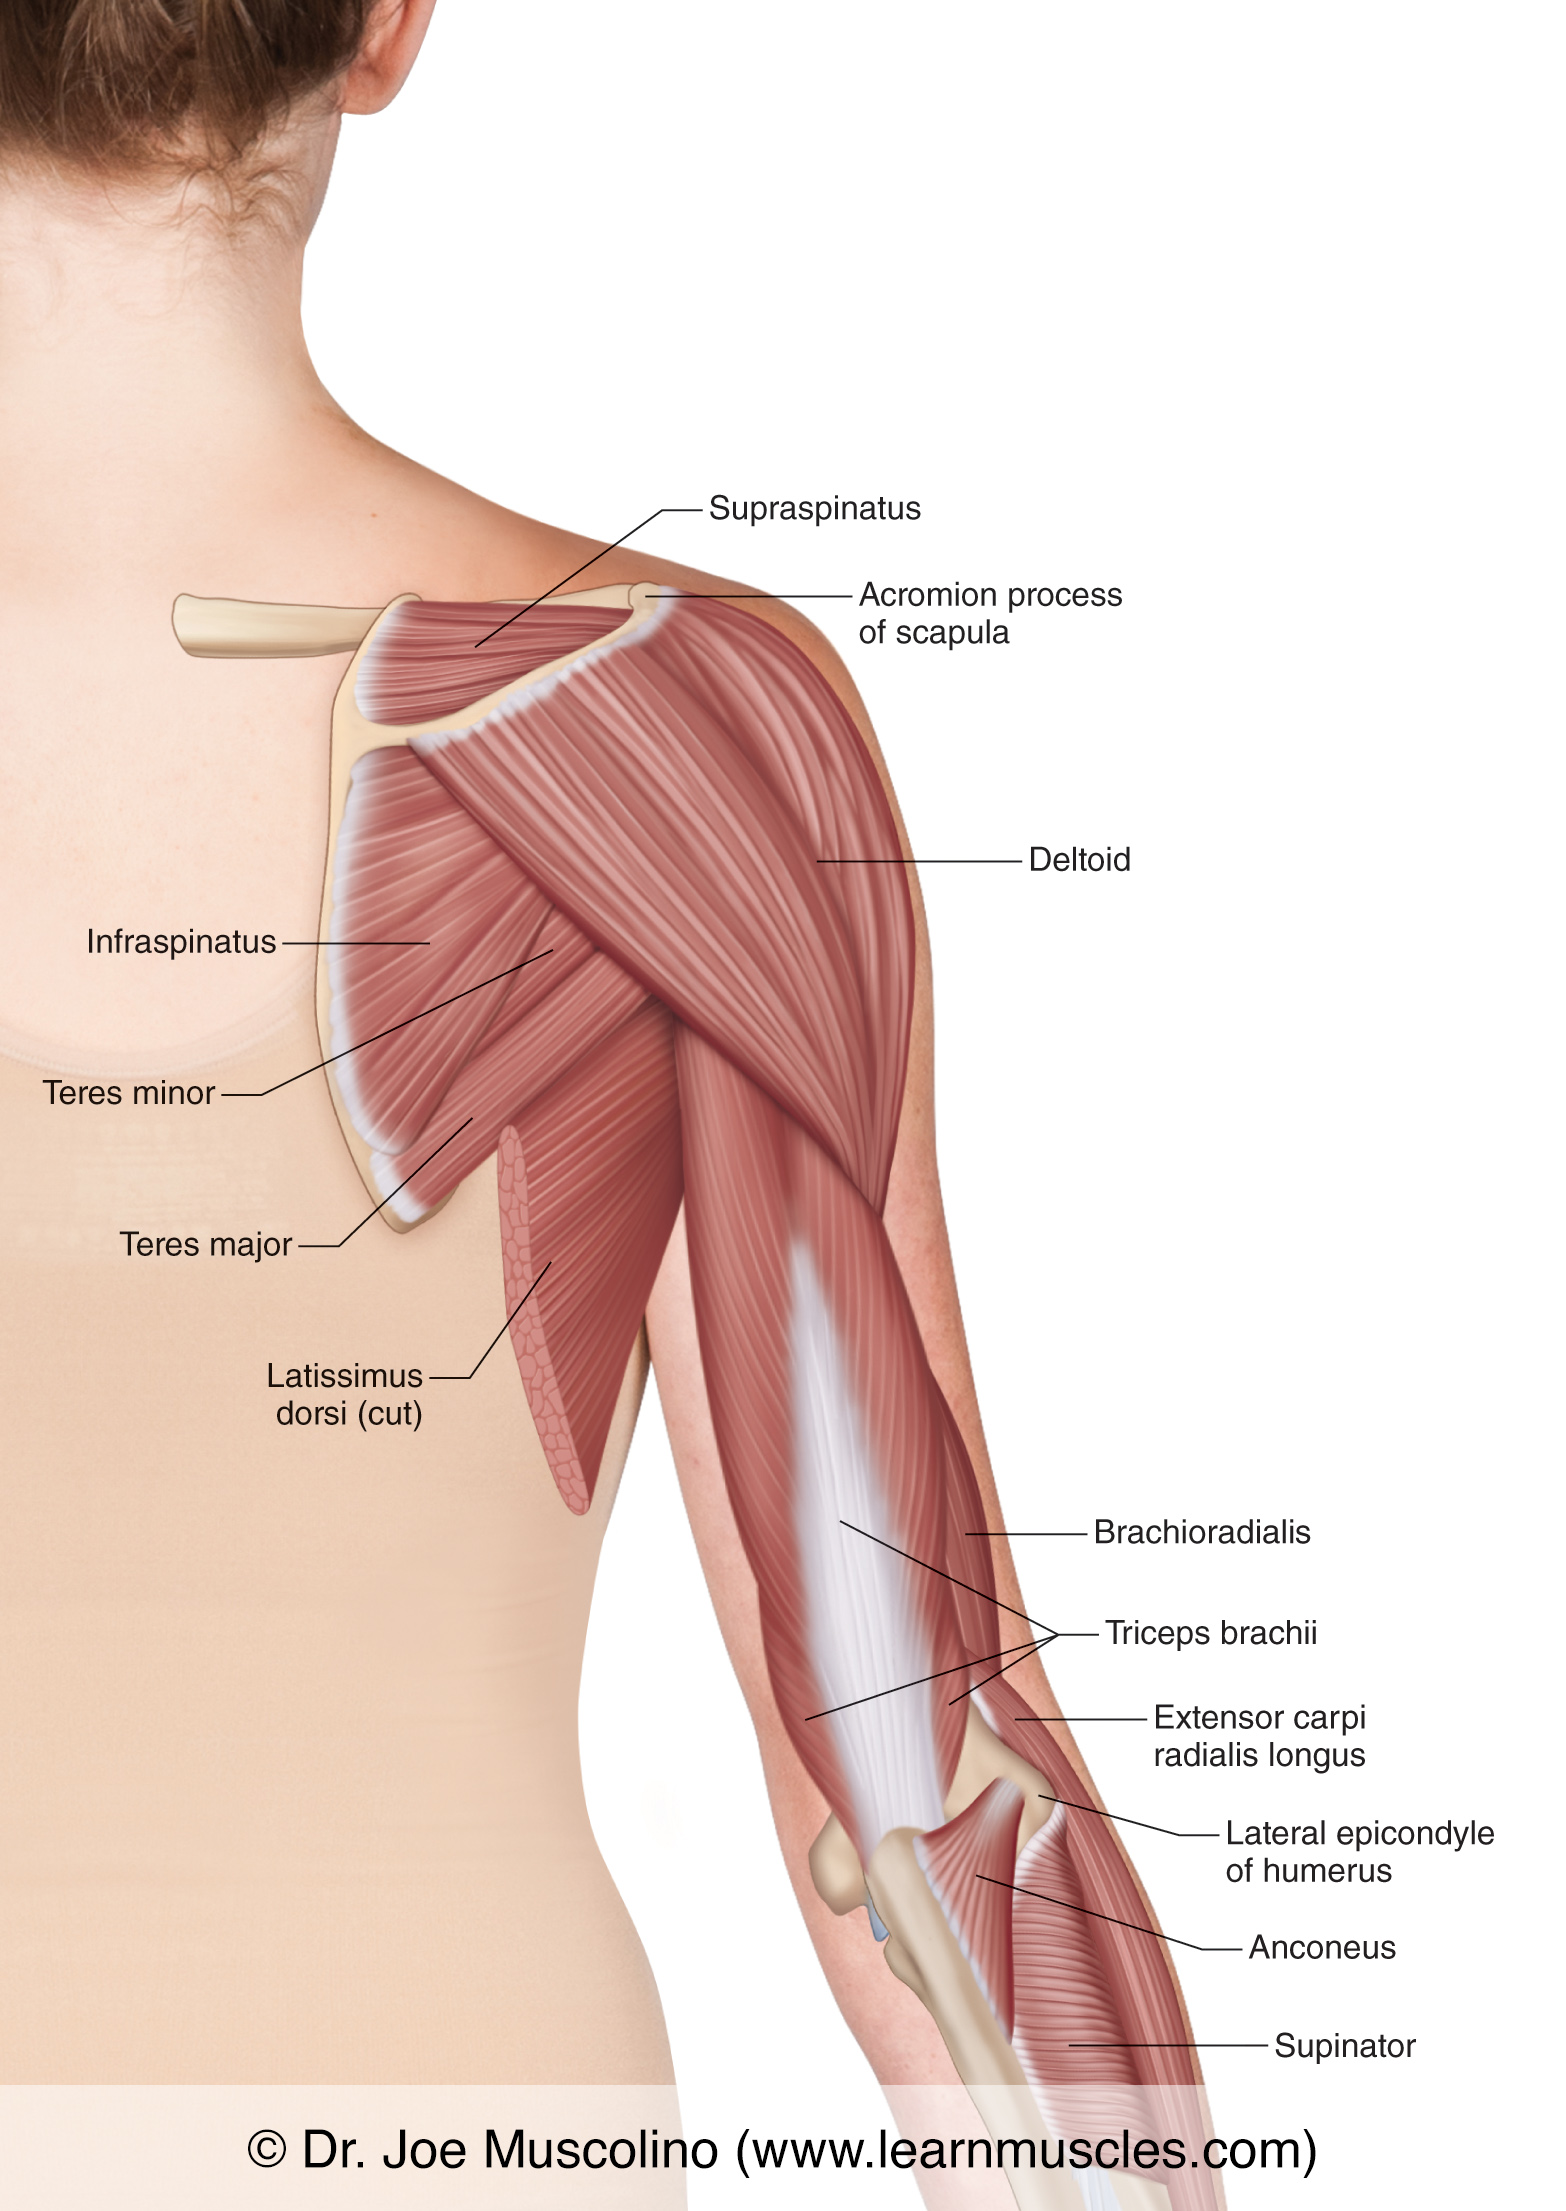 Muscles of the Posterior Arm - Superficial View - Learn Muscles